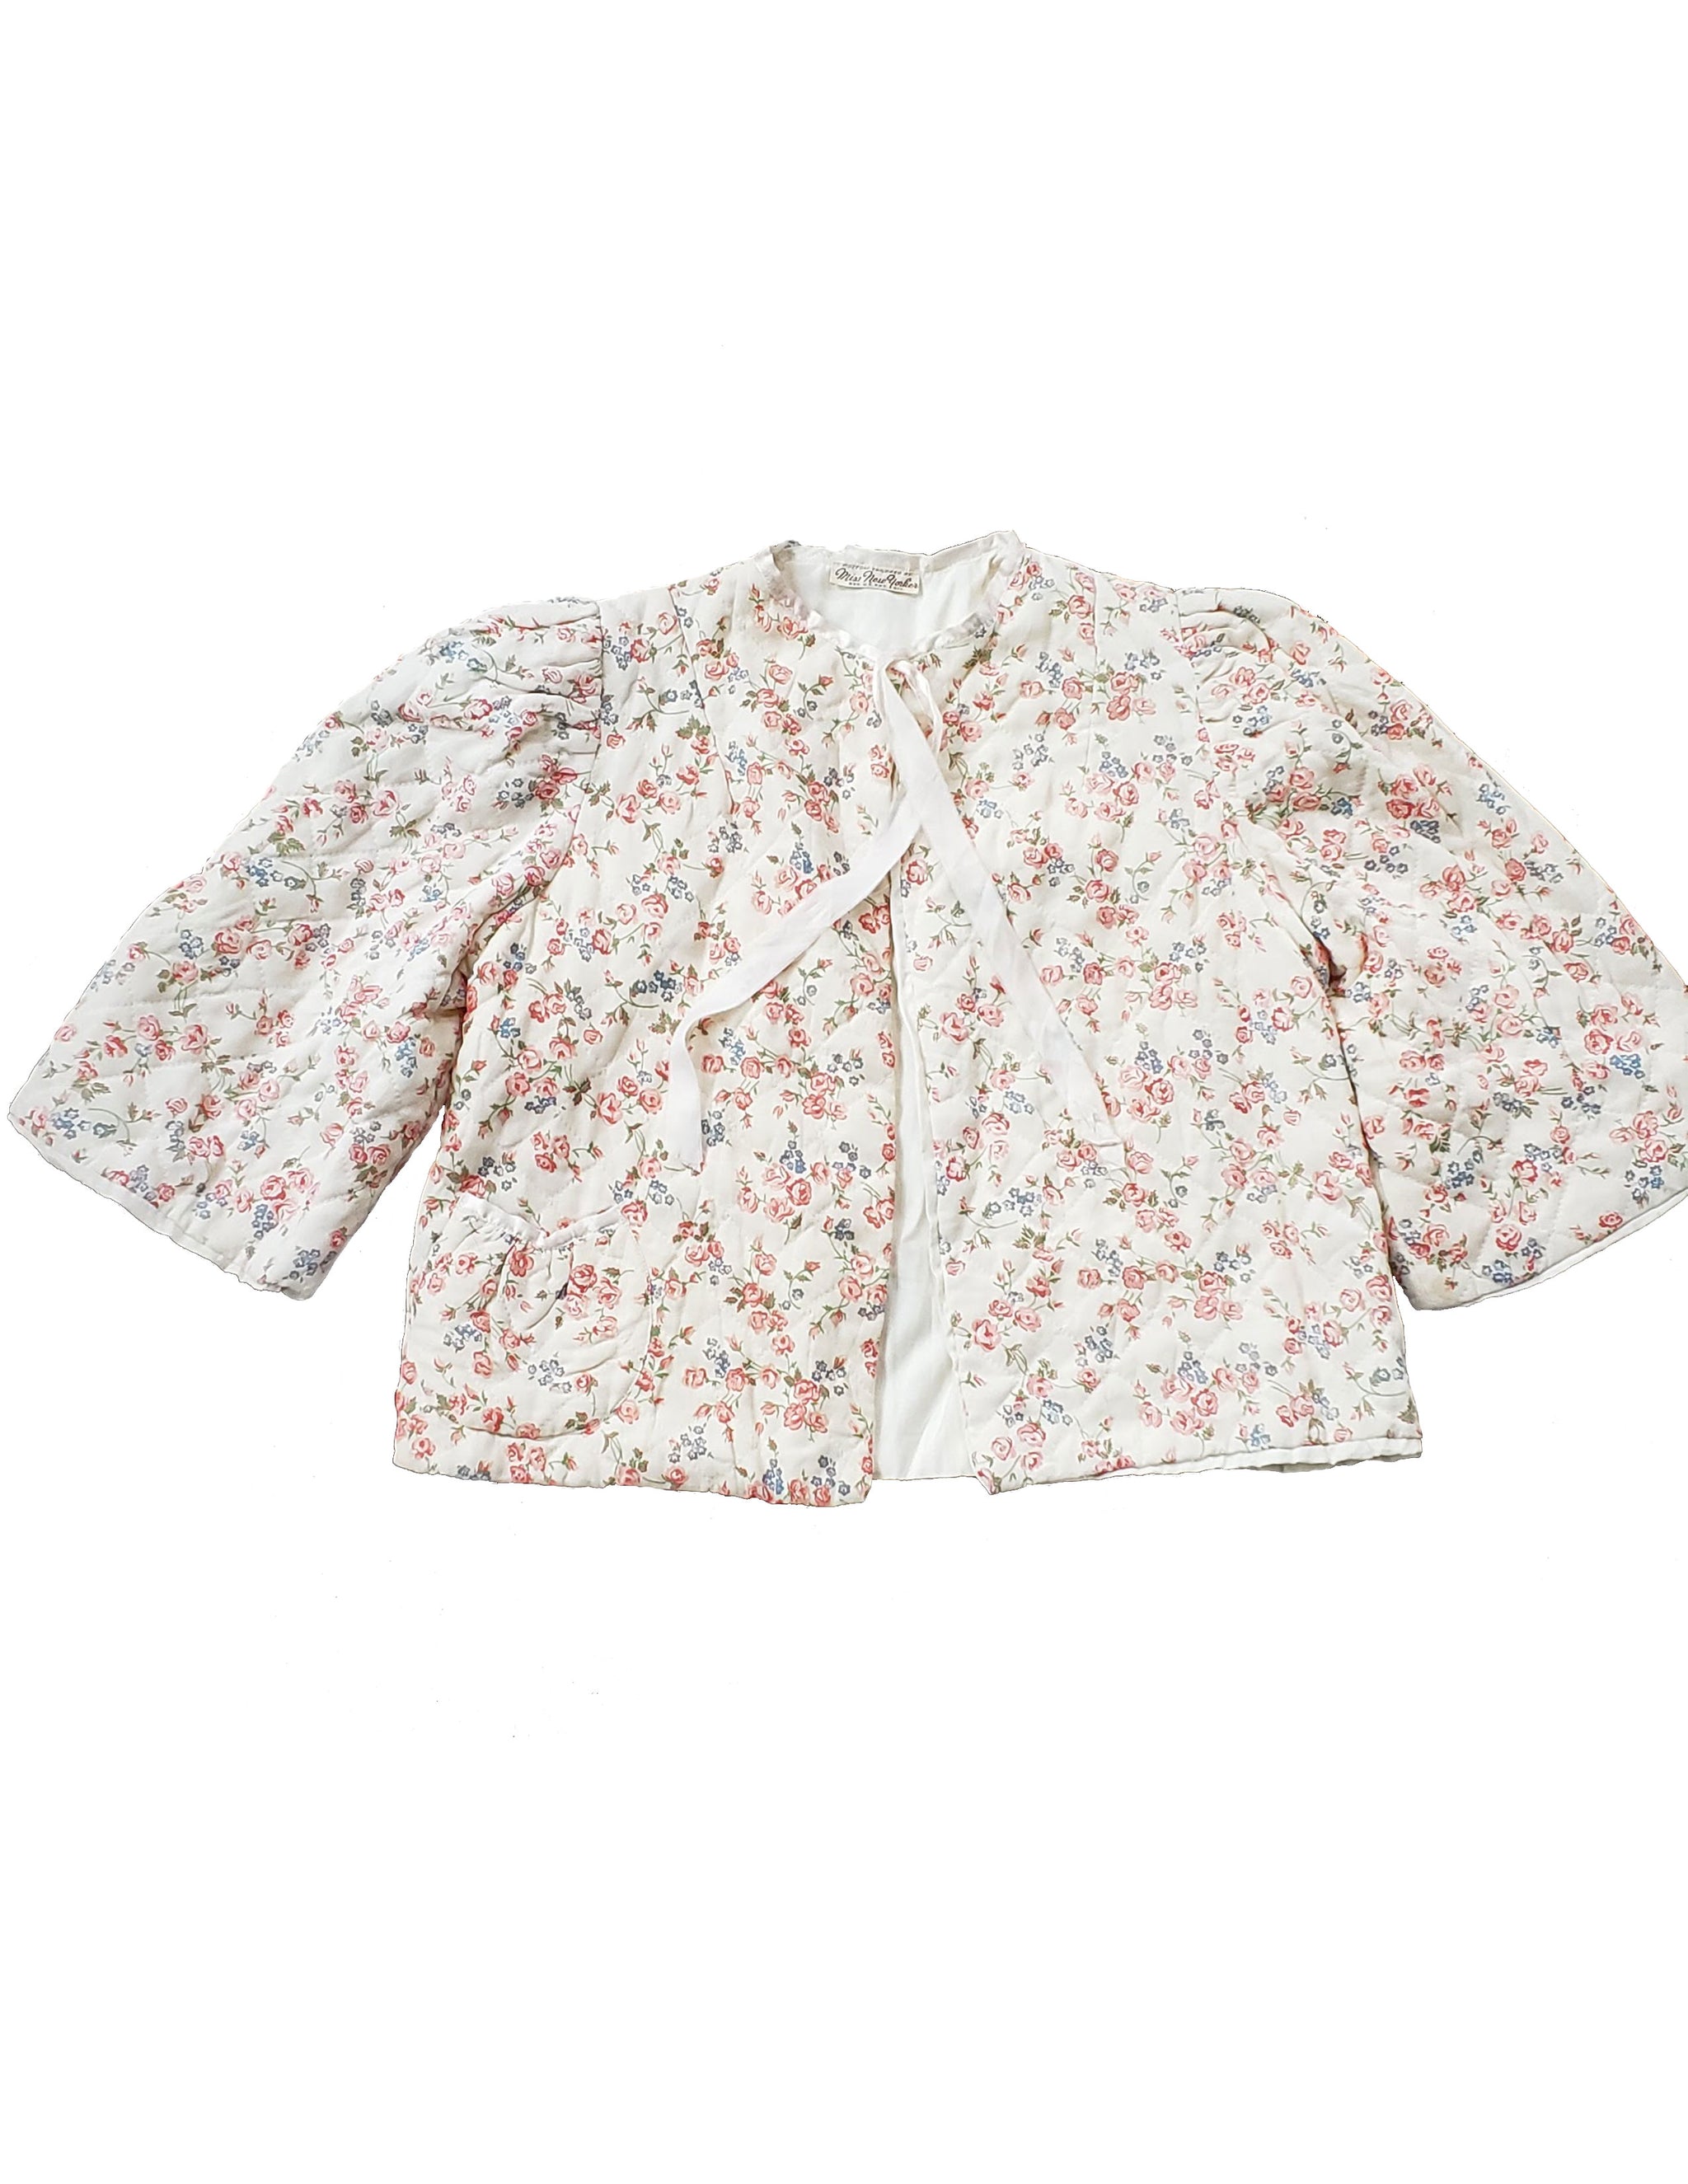 Rare Vintage 1960s Quilted Floral Bed Jacket